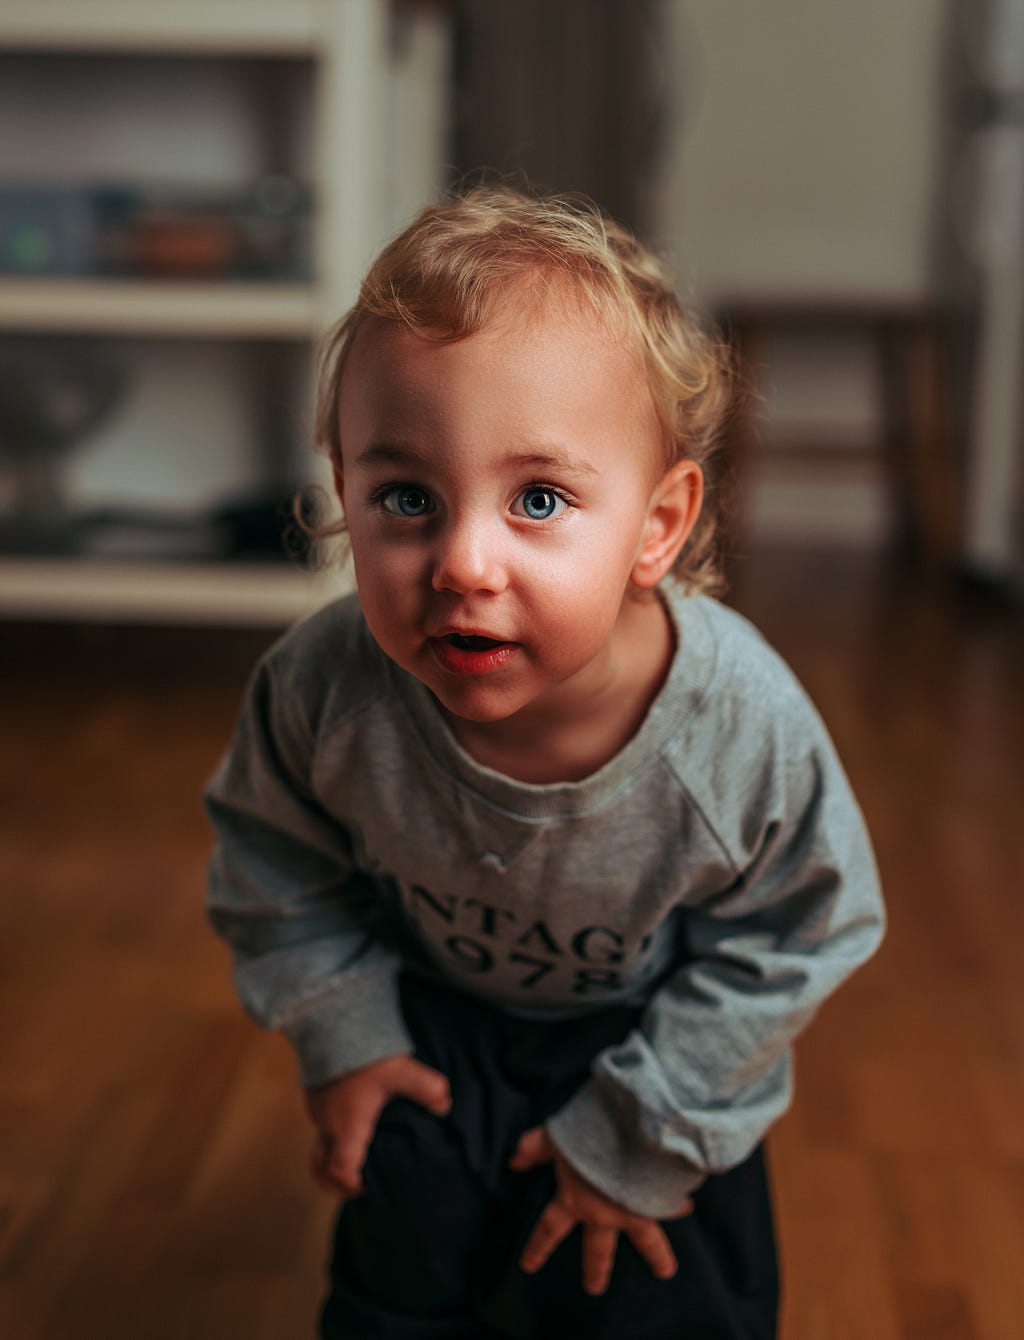 This is a baby child. He is wearing a grey T-shirt. His eyes are light blue. His complexion is white. His hair is golden brown. This child appears to be highly sensitive.